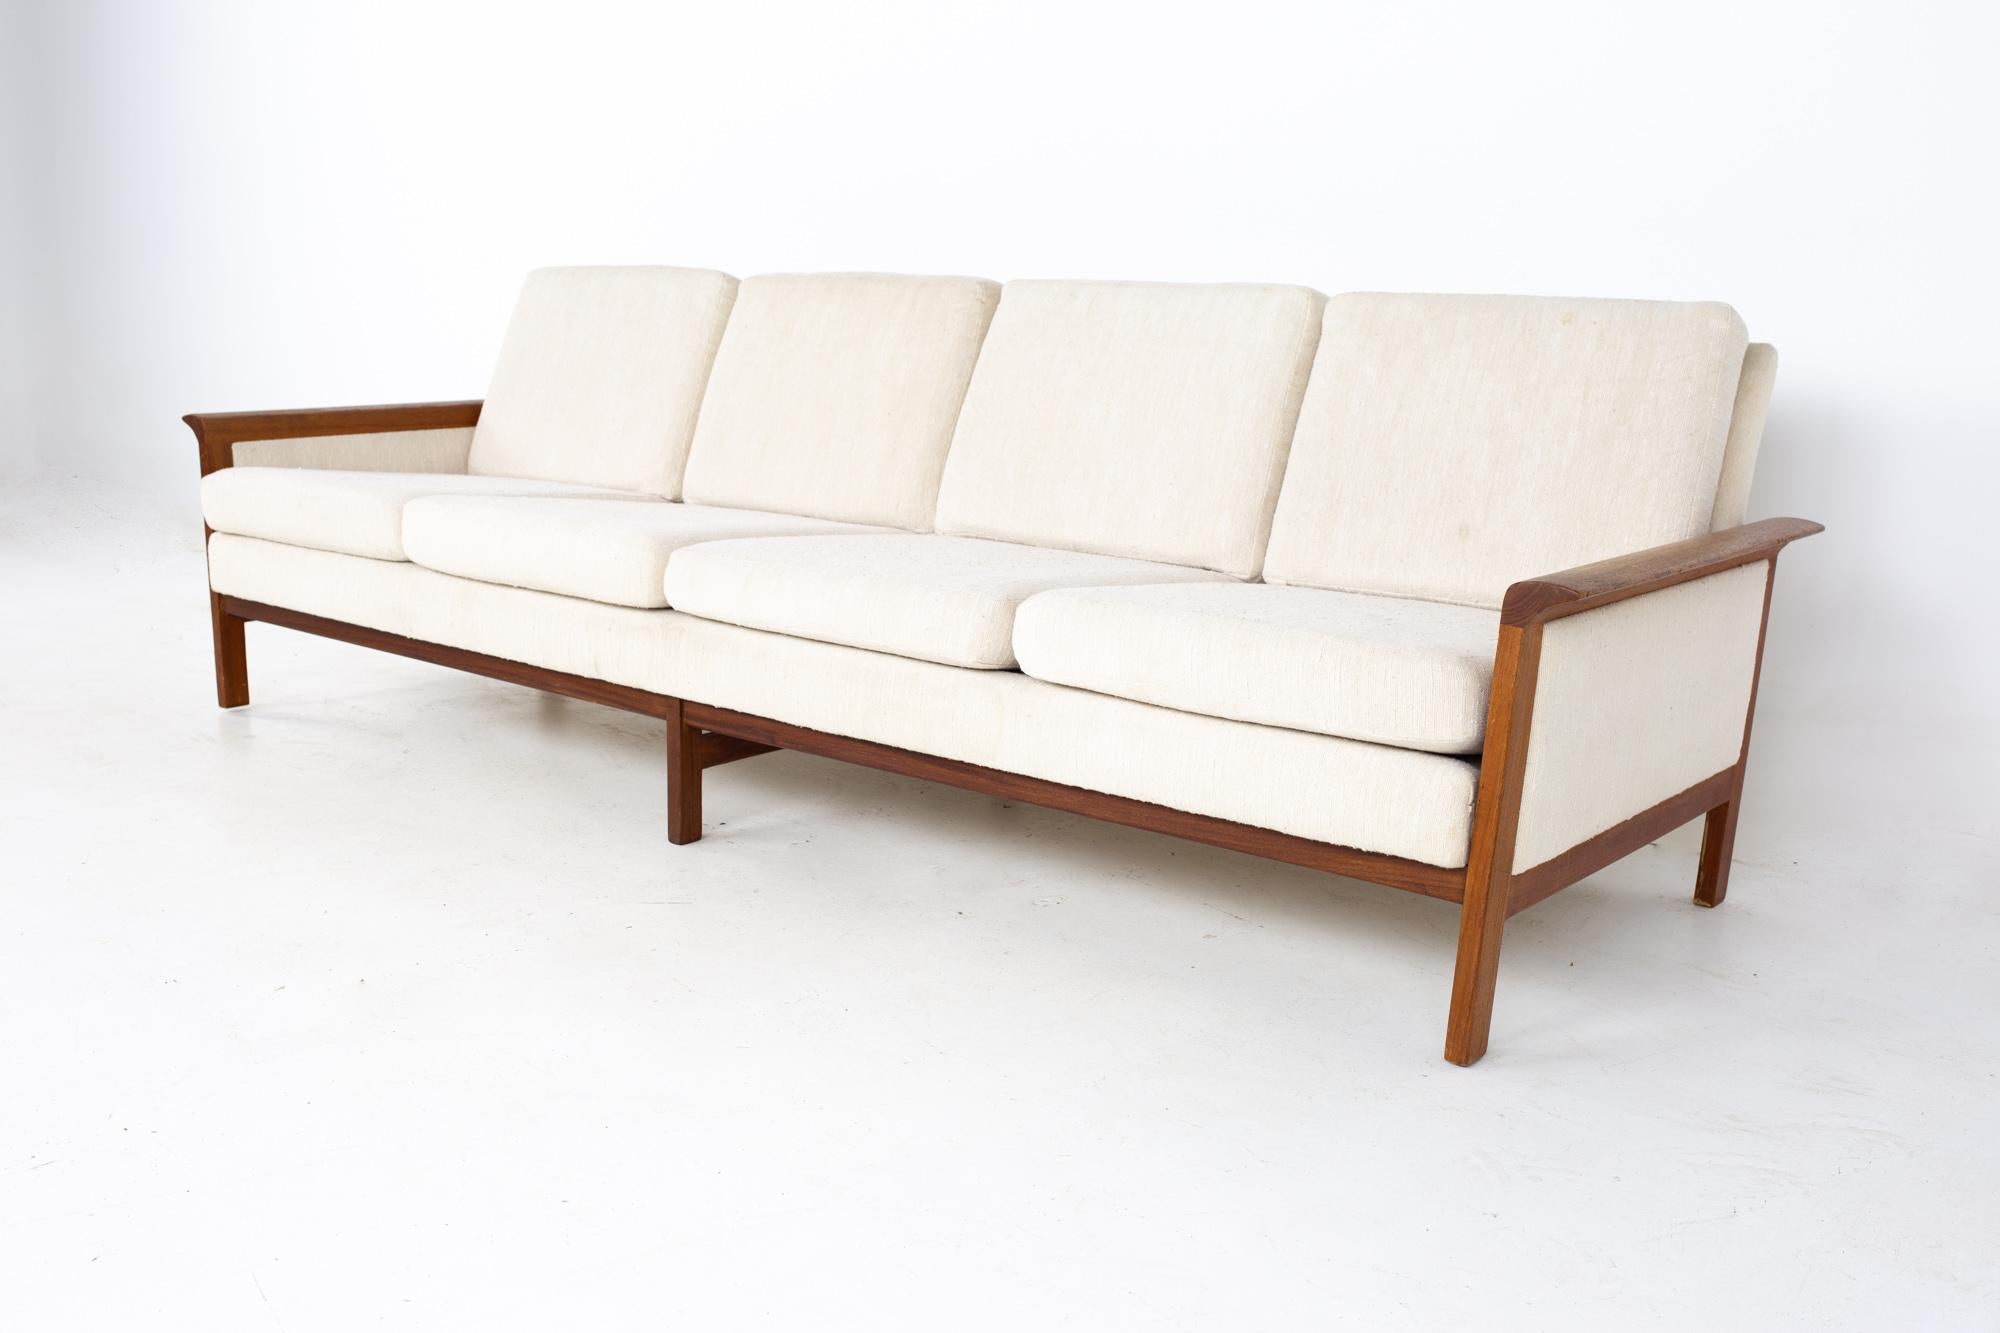 Knut Saeter for Vatne Mobler style mid century Danish teak four seater sofa.
Sofa measures: 96 wide x 32 deep x 30 high, with a seat height of 17 inches and an arm height of 20 inches

 All pieces of furniture can be had in what we call restored